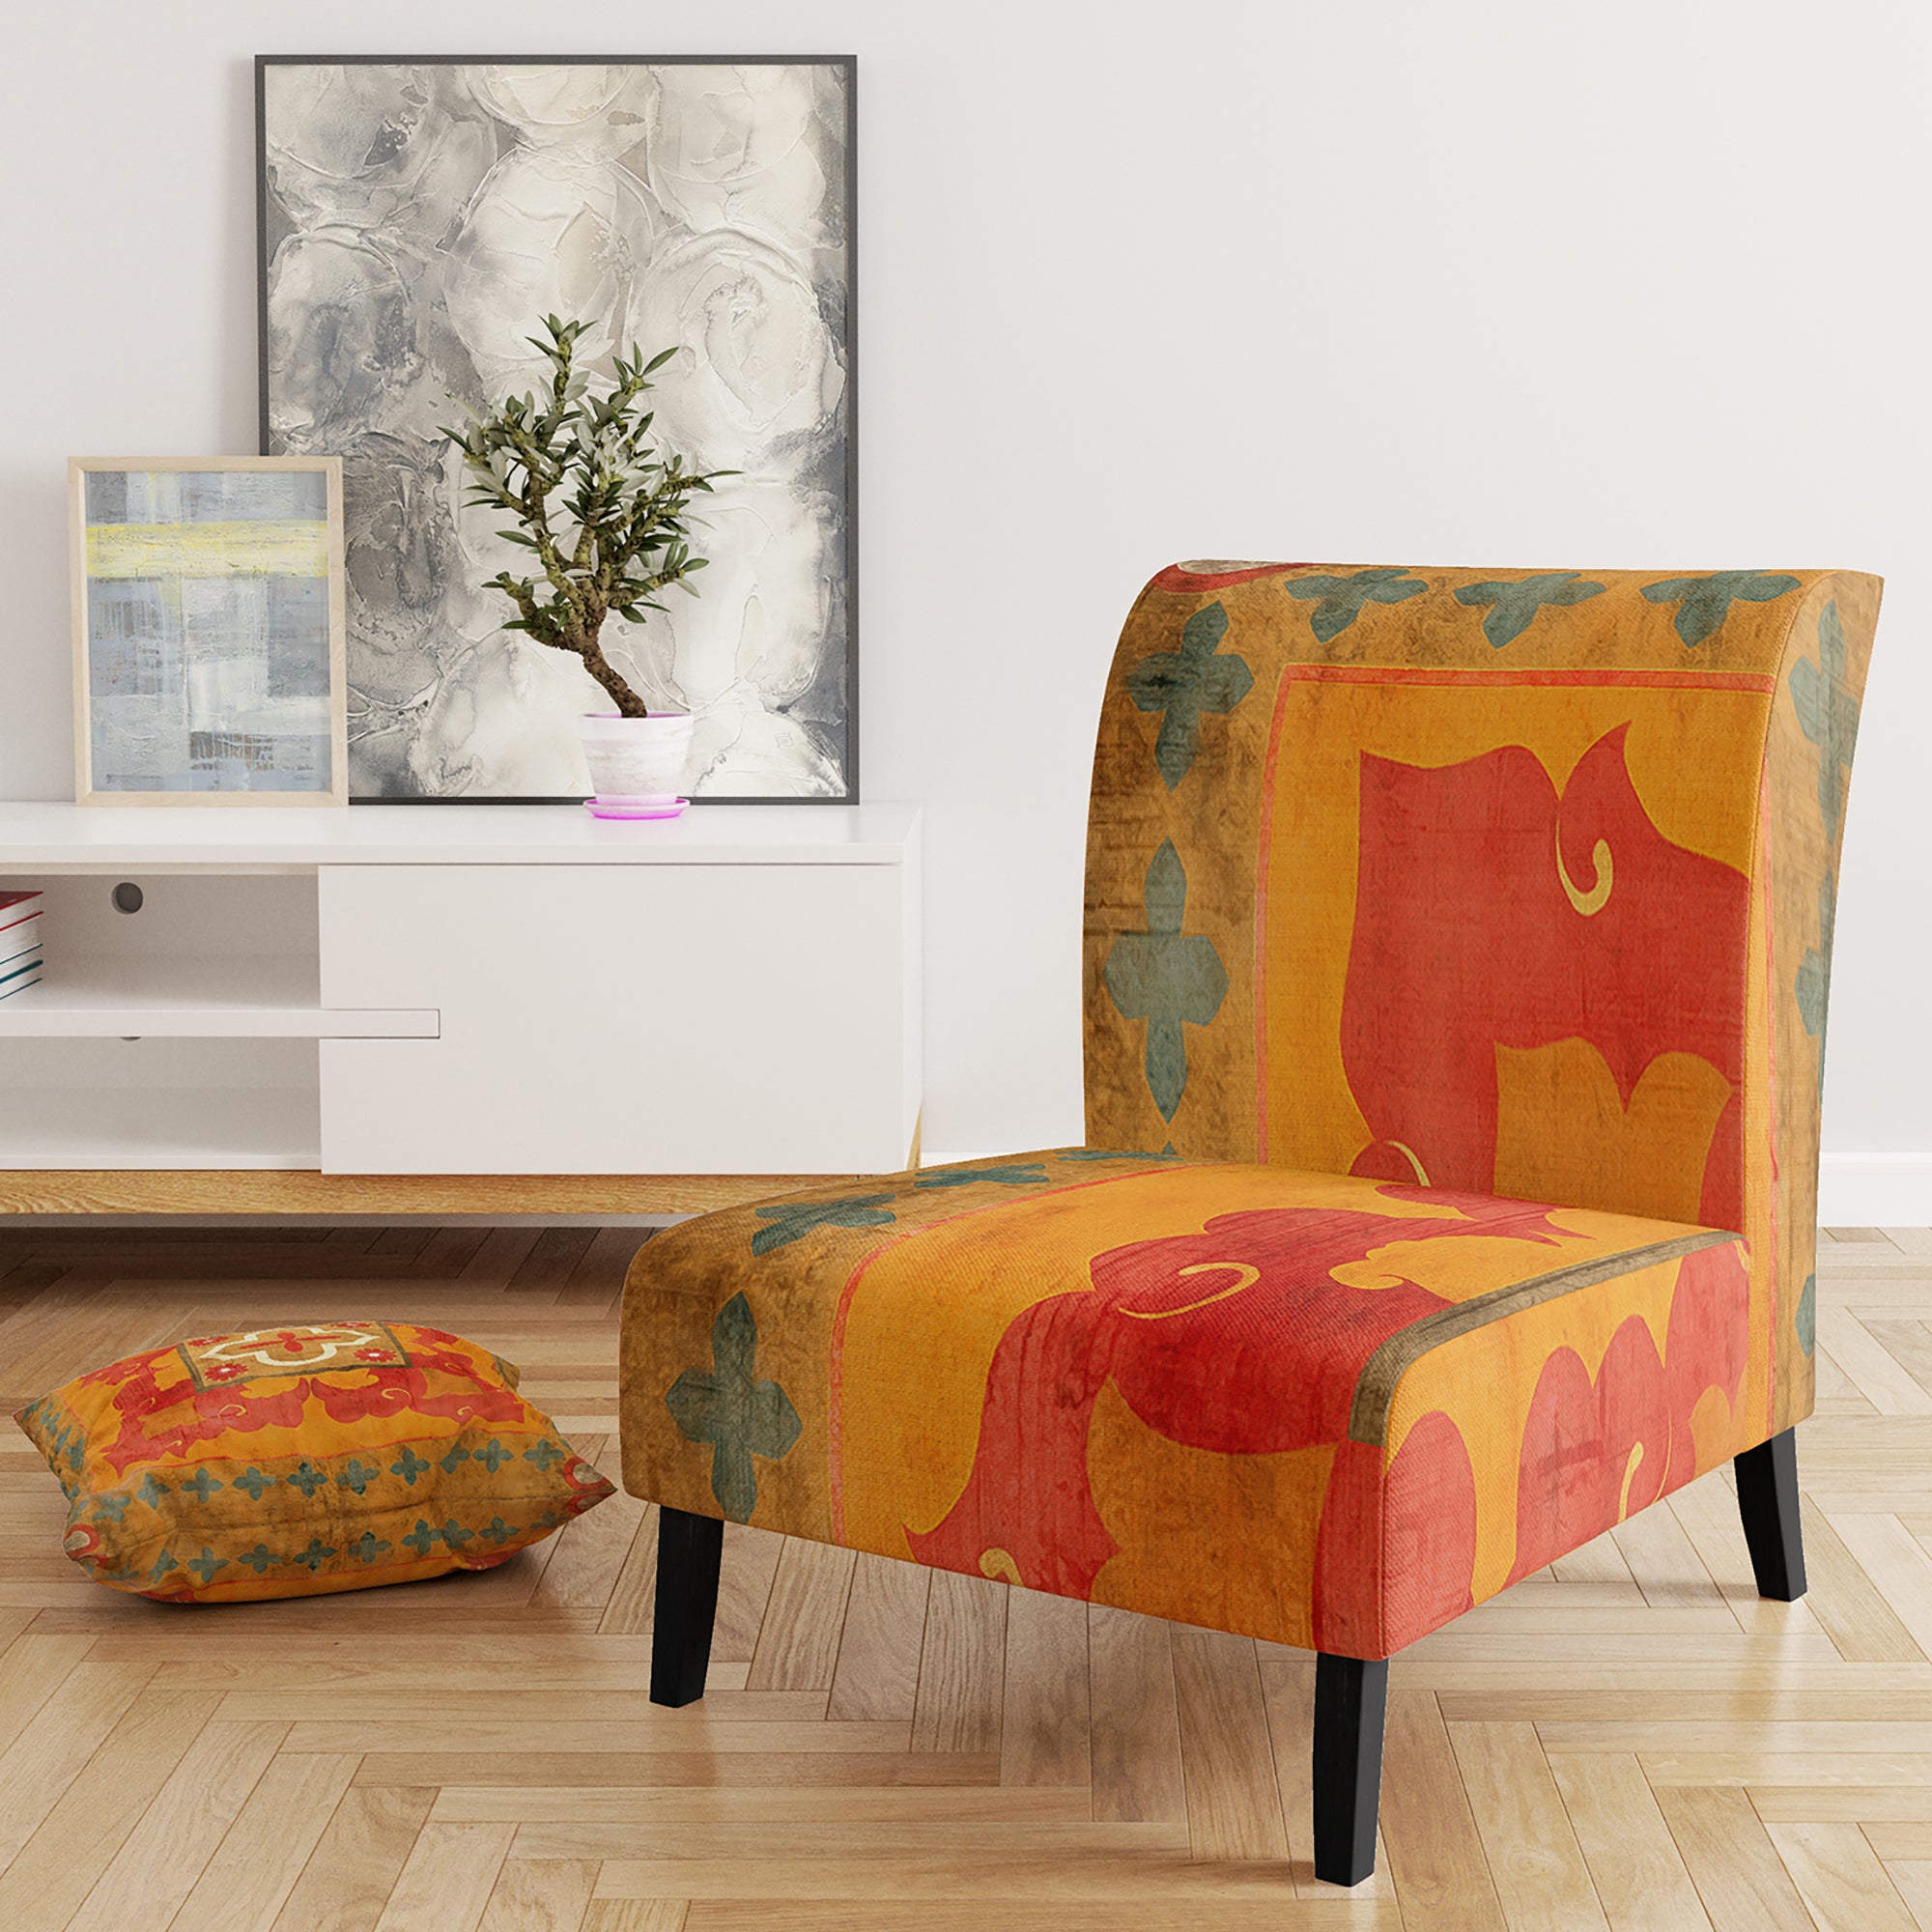 Moroccan Orange Tiles Collage II Bohemian Chic Accent Chair